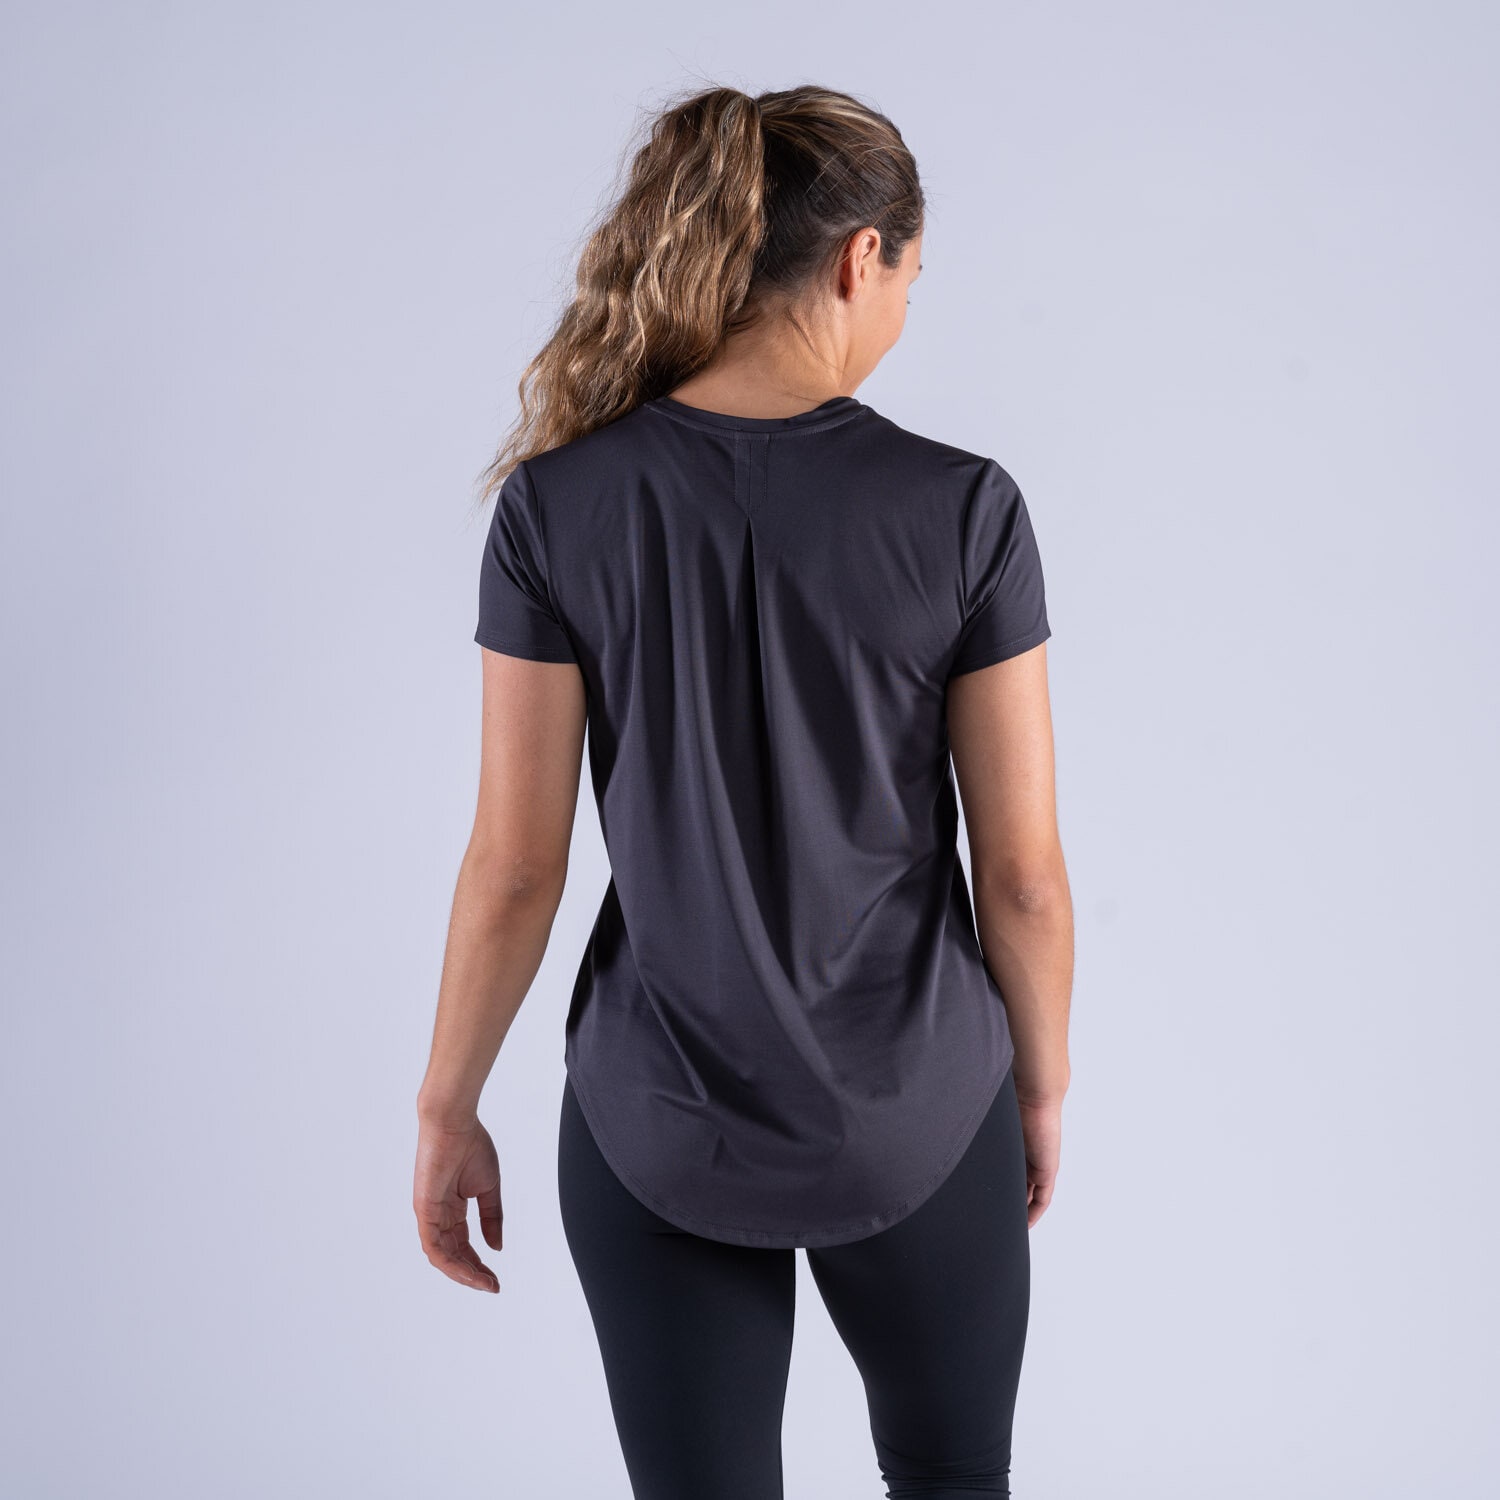 CLN Lucy ws t-shirt Charcoal